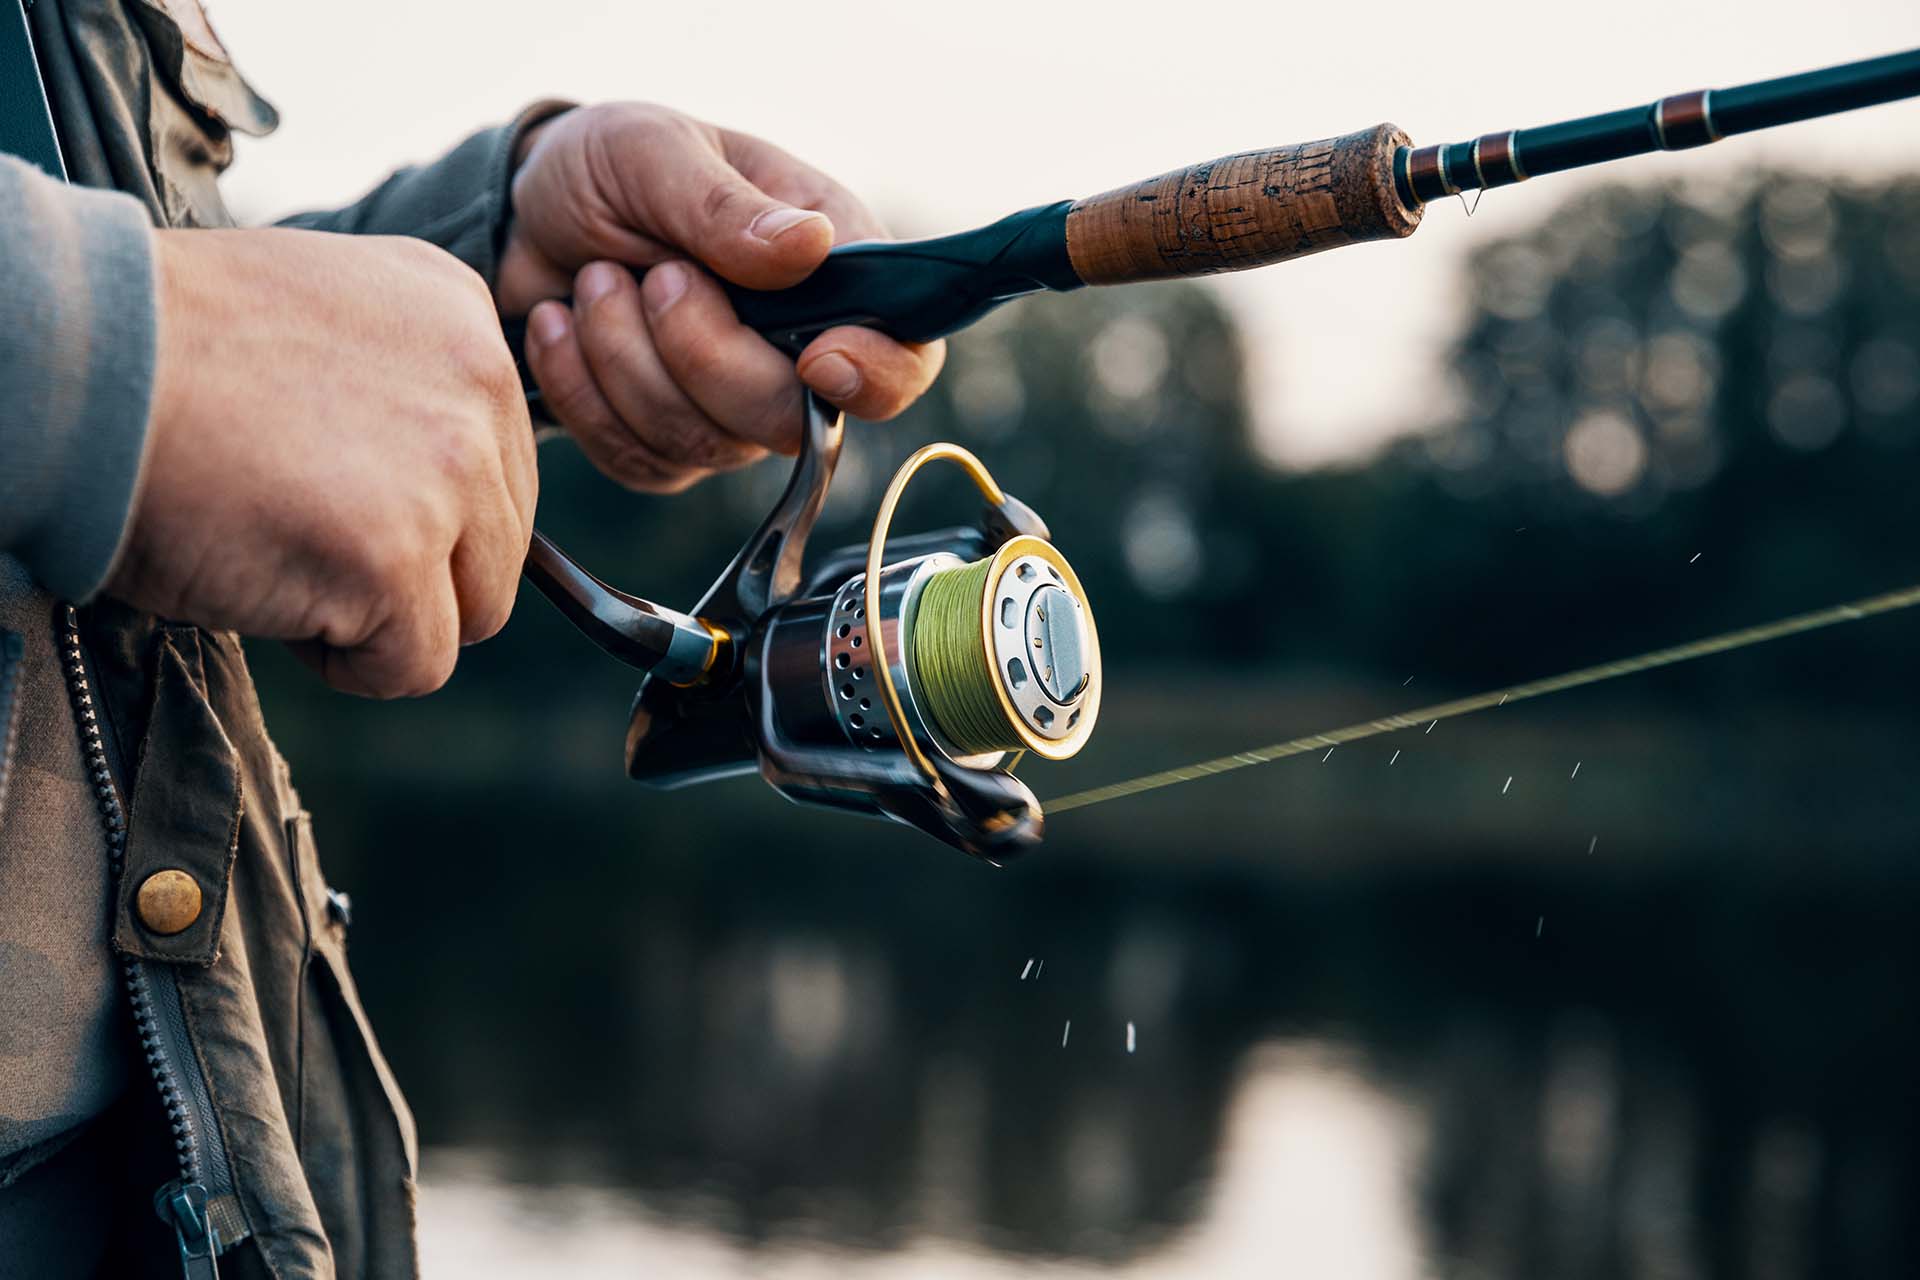  A fisherman holding a fishing rod with a spinning reel